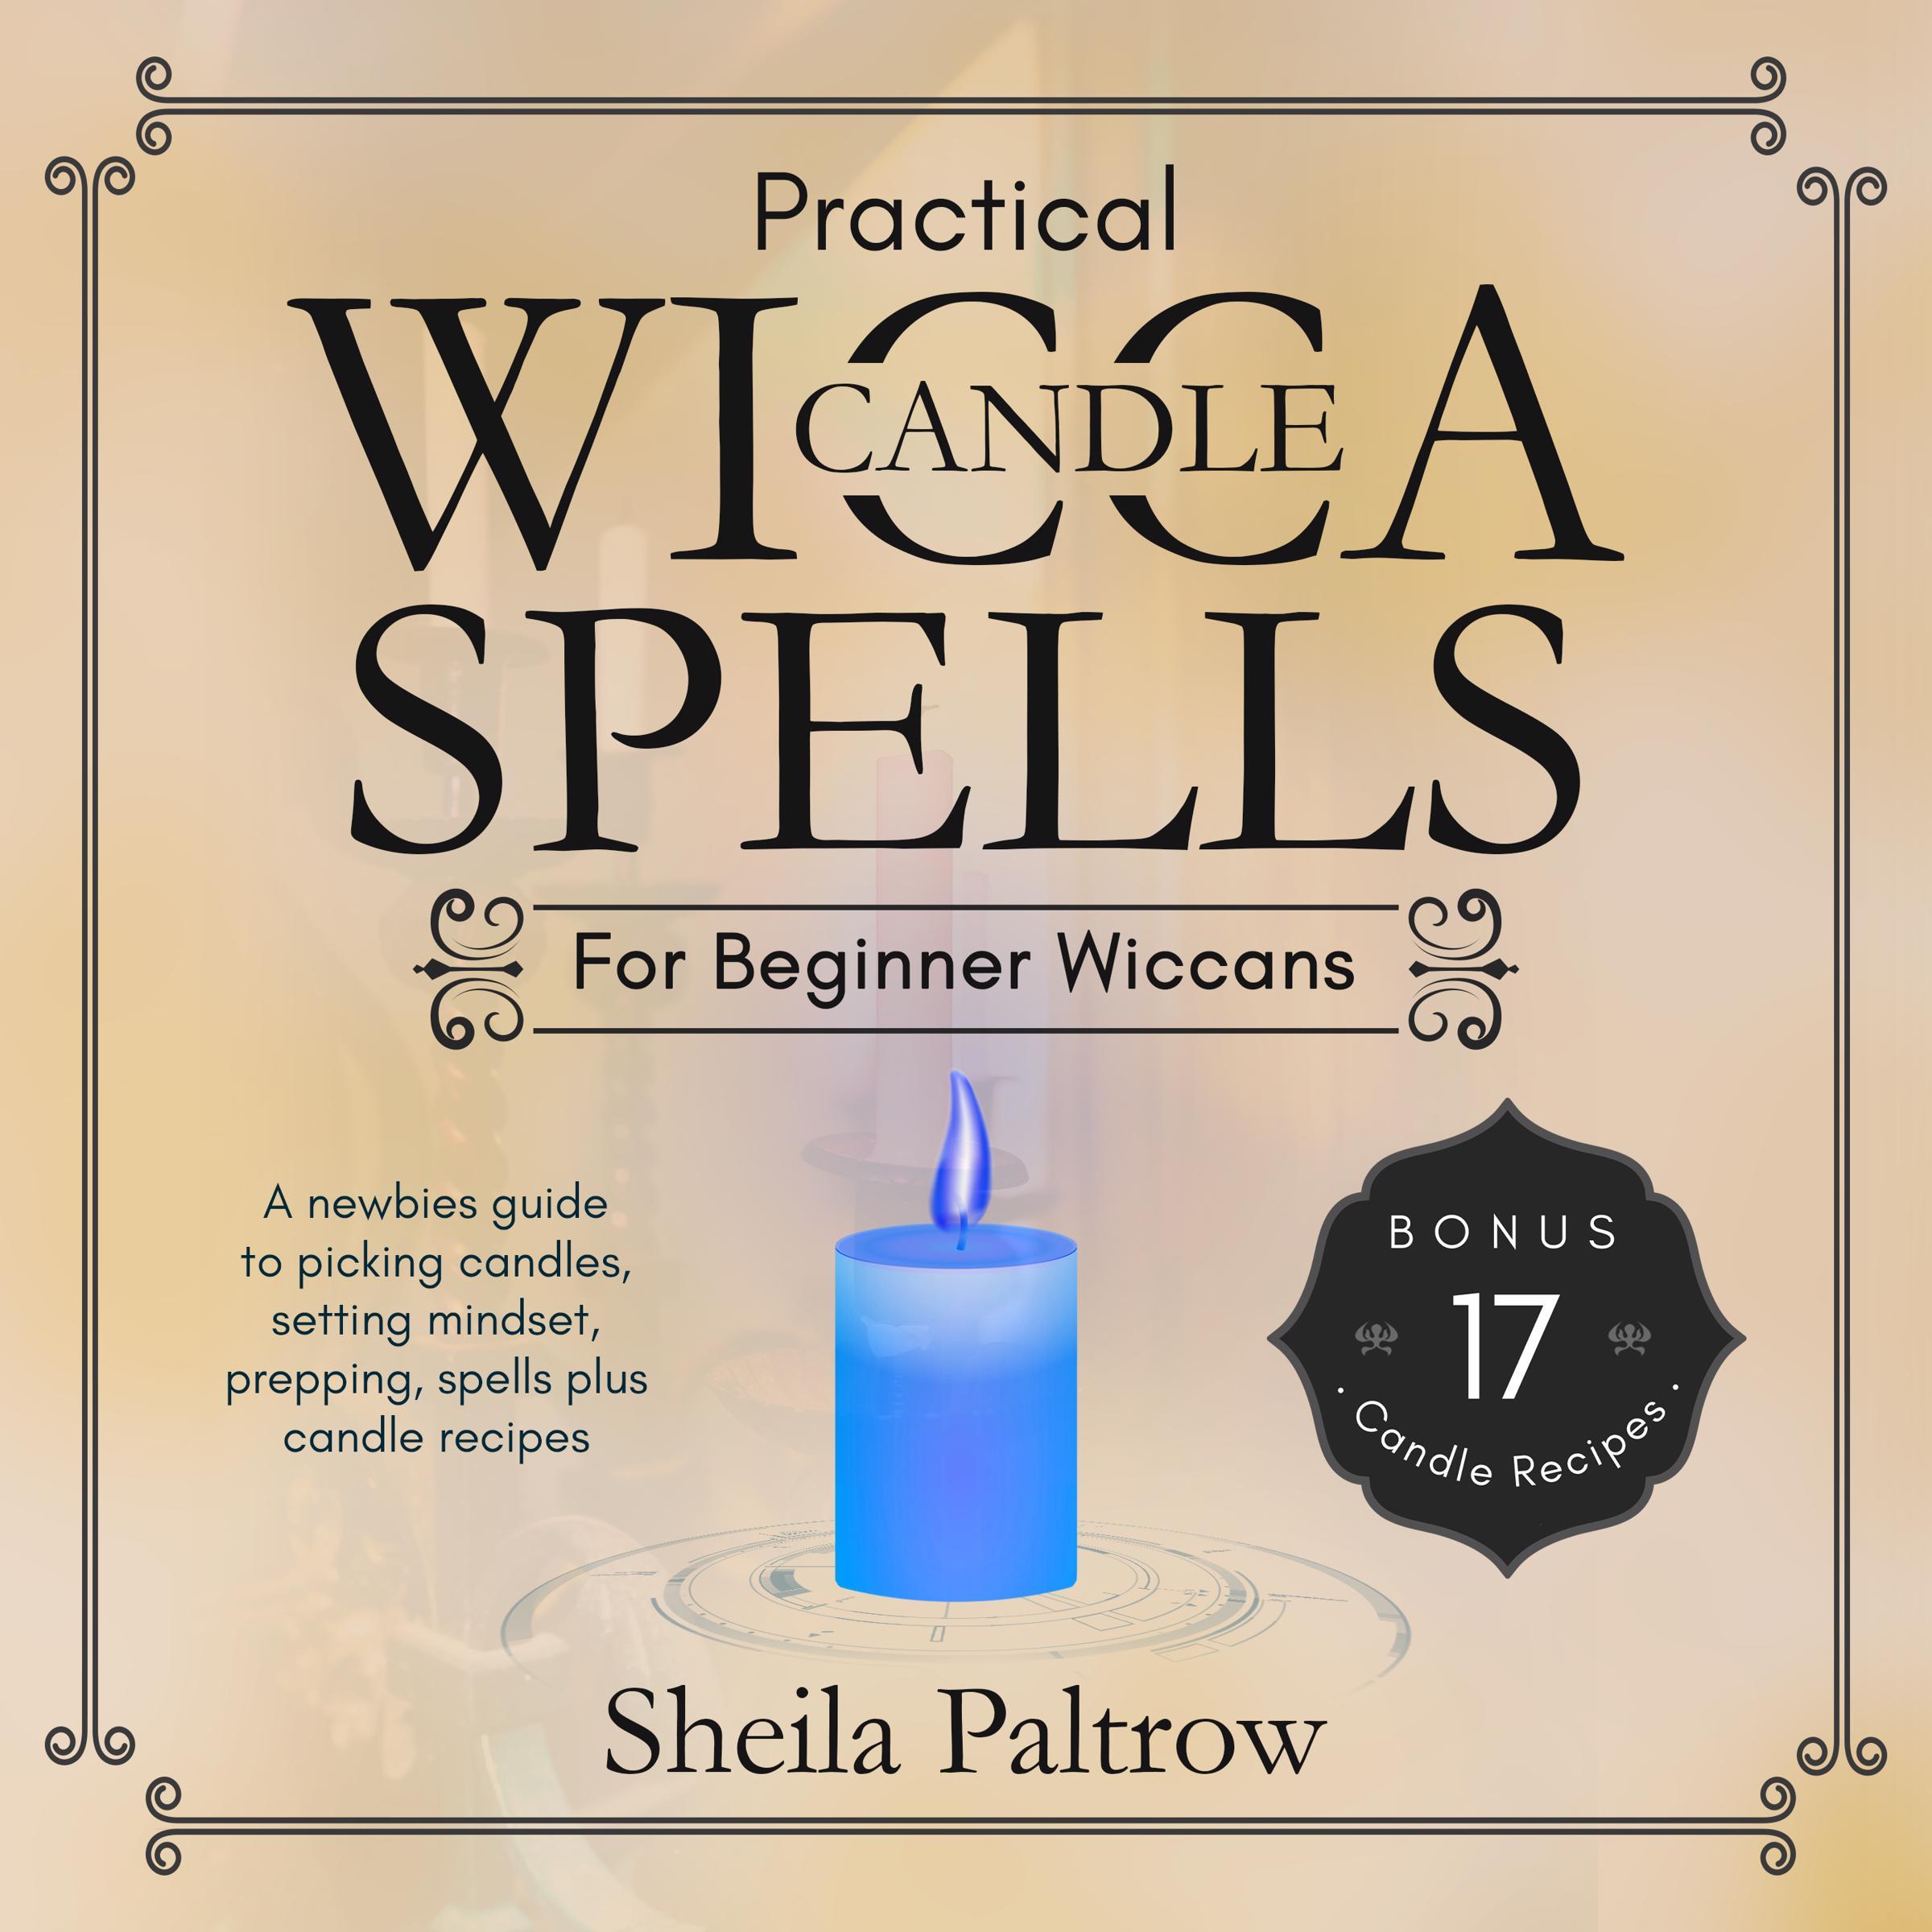 Practical Wicca Candle Spells for Beginner Wiccans